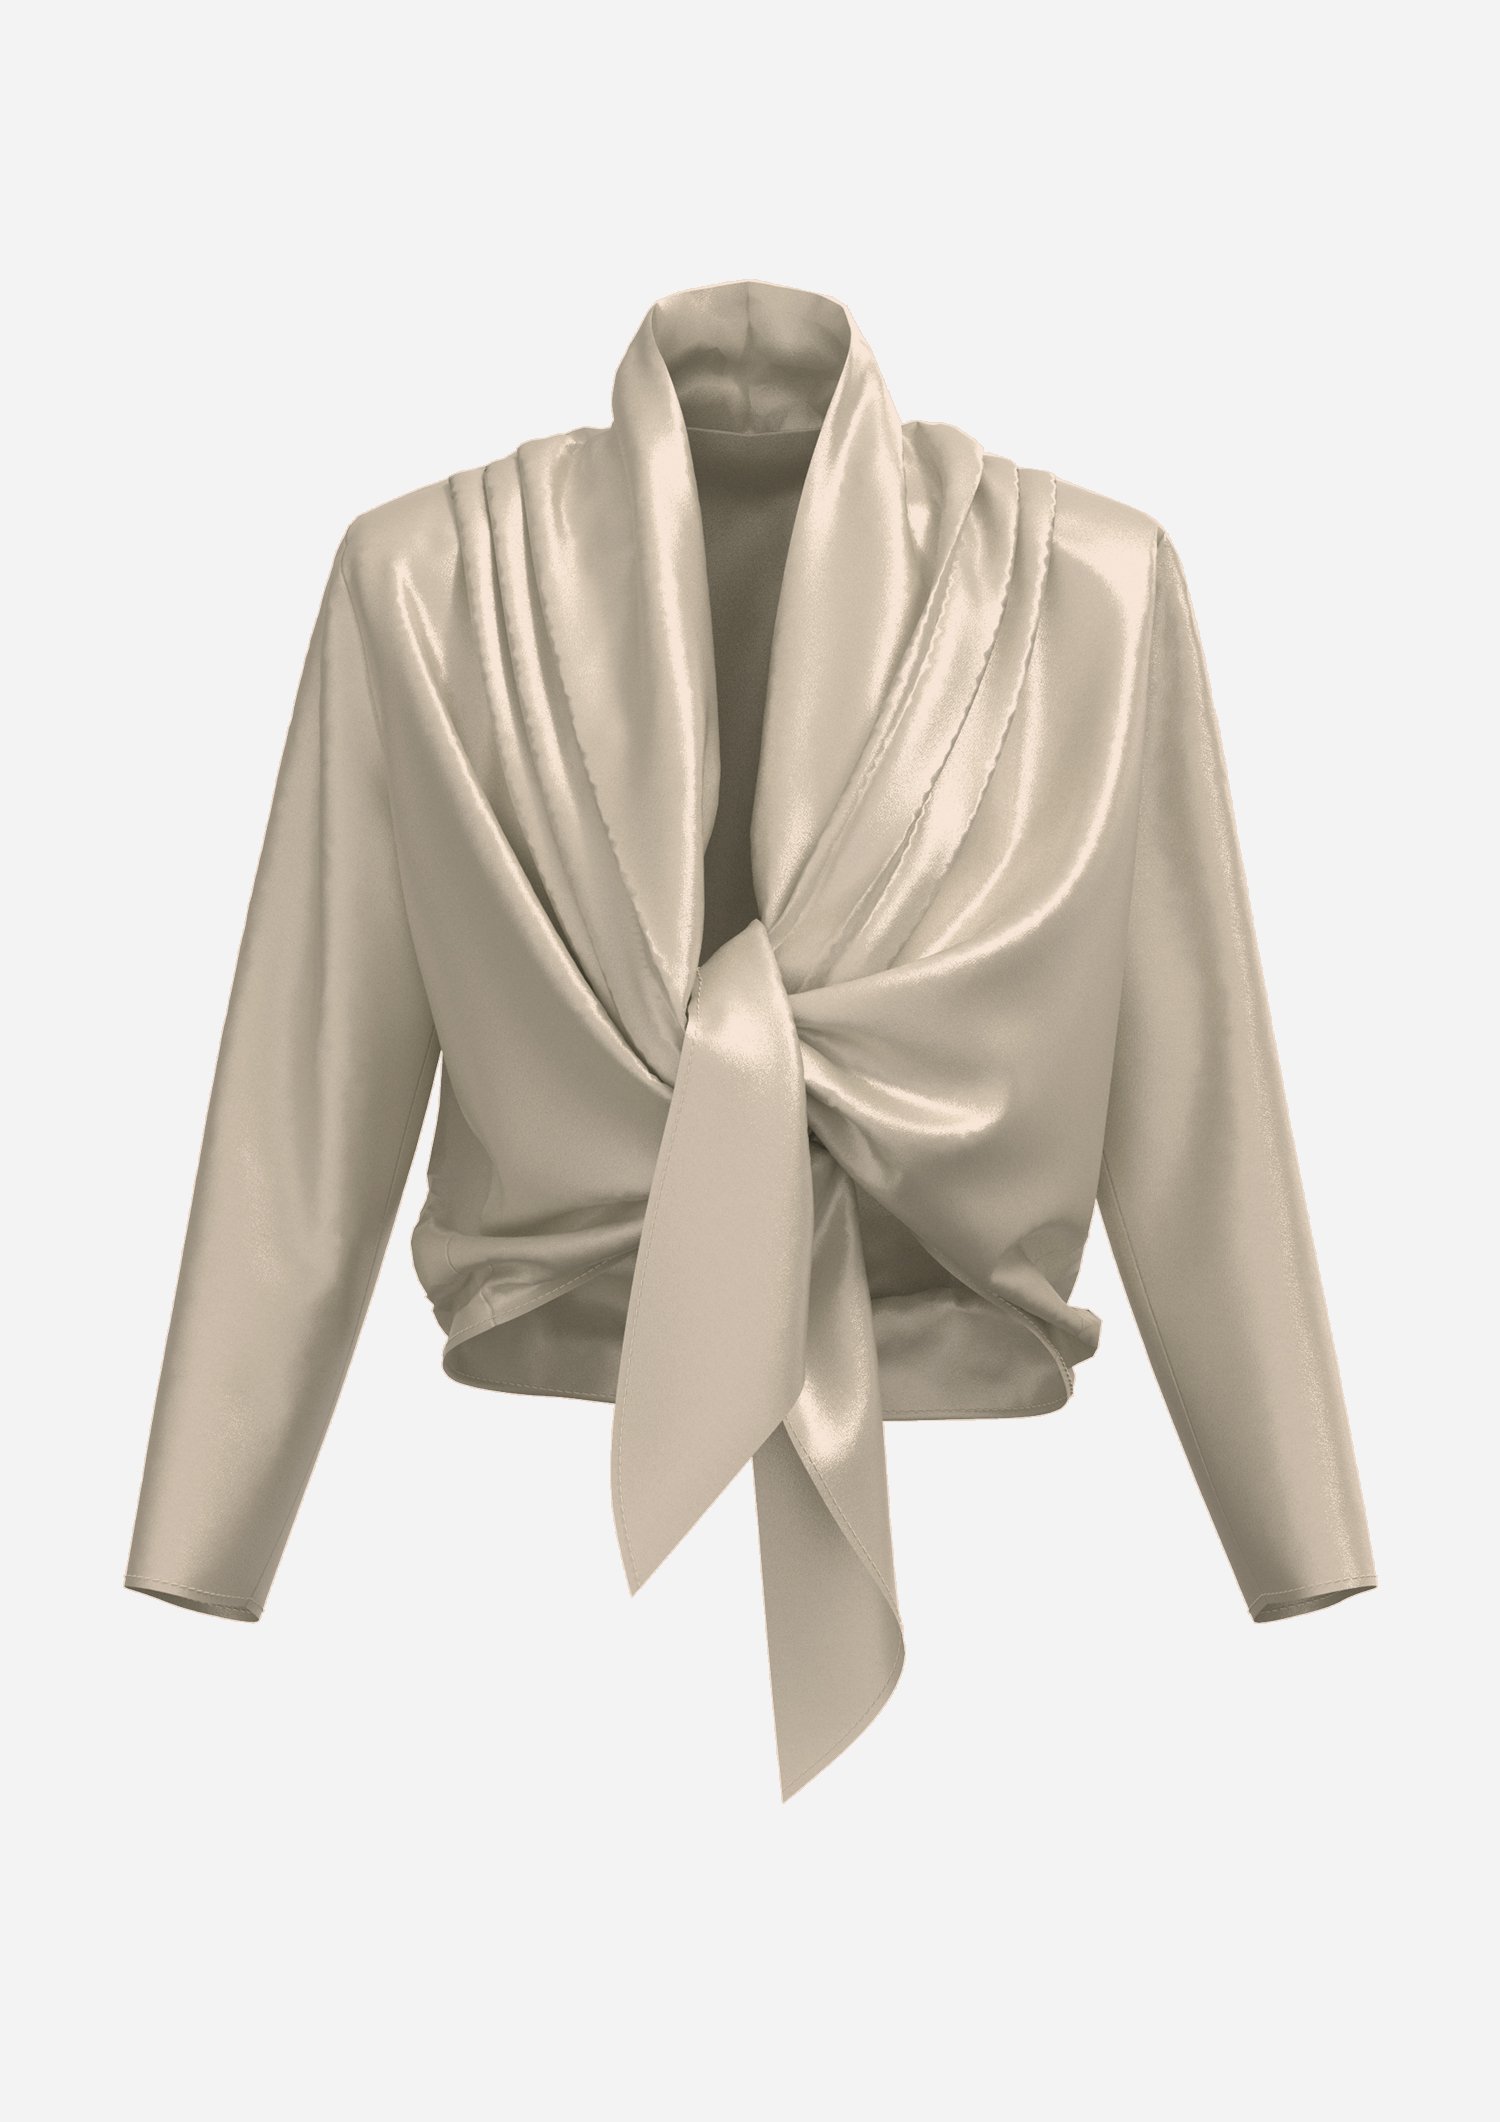 Wrap blouse in champagner